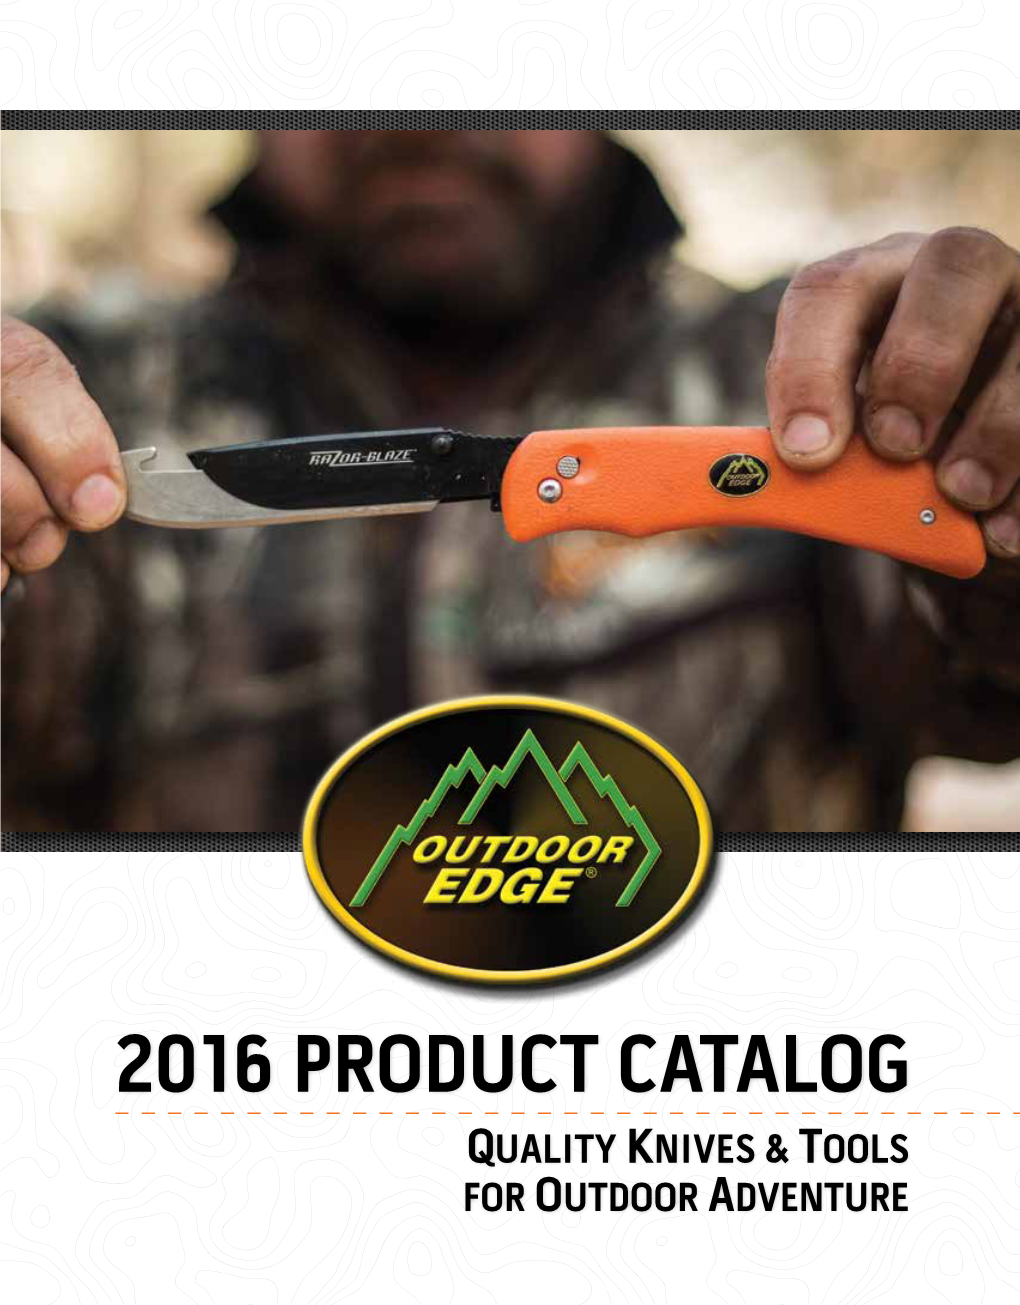 2016 PRODUCT CATALOG QUALITY KNIVES & TOOLS for OUTDOOR ADVENTURE Field-Proven and Razor Sharp to Get the Job Done Fast